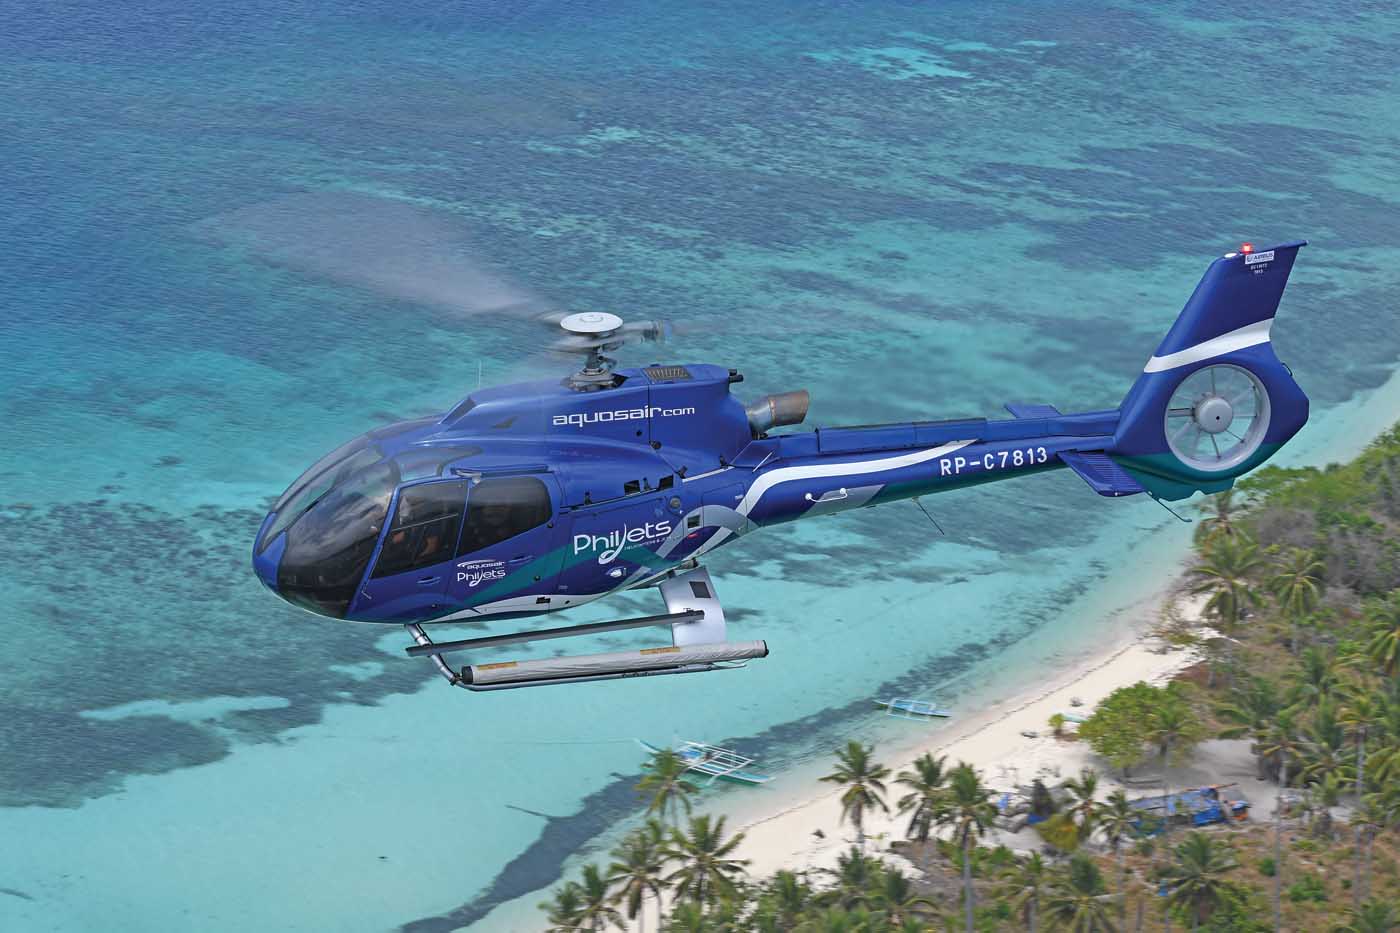 A PhilJets Airbus H130 flies over a picture-perfect piece of Philippine coastline.